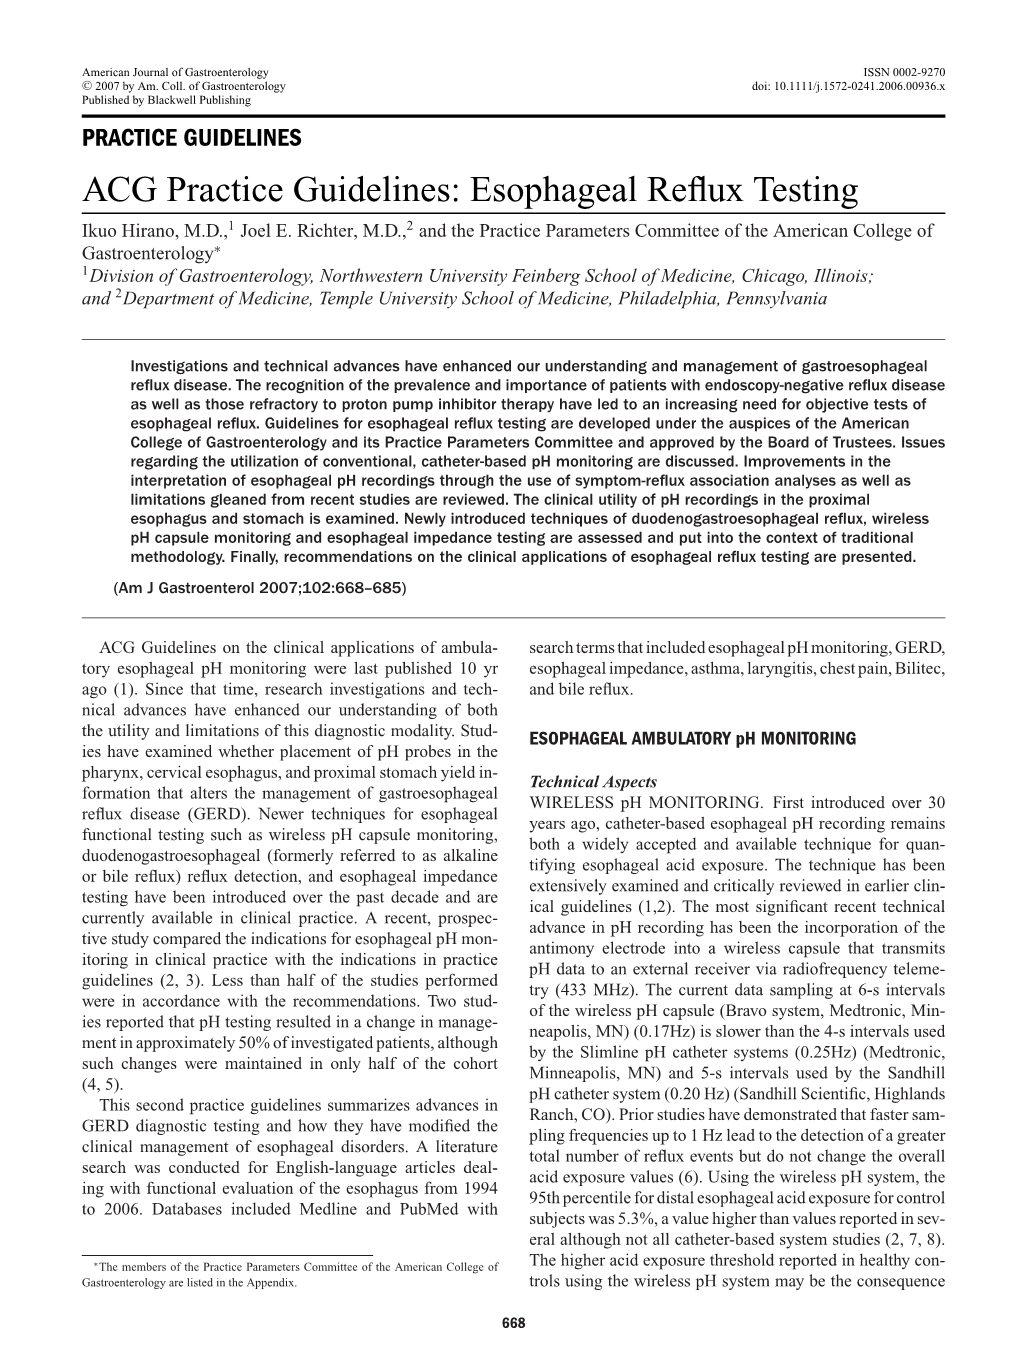 ACG Practice Guidelines: Esophageal Reflux Testing